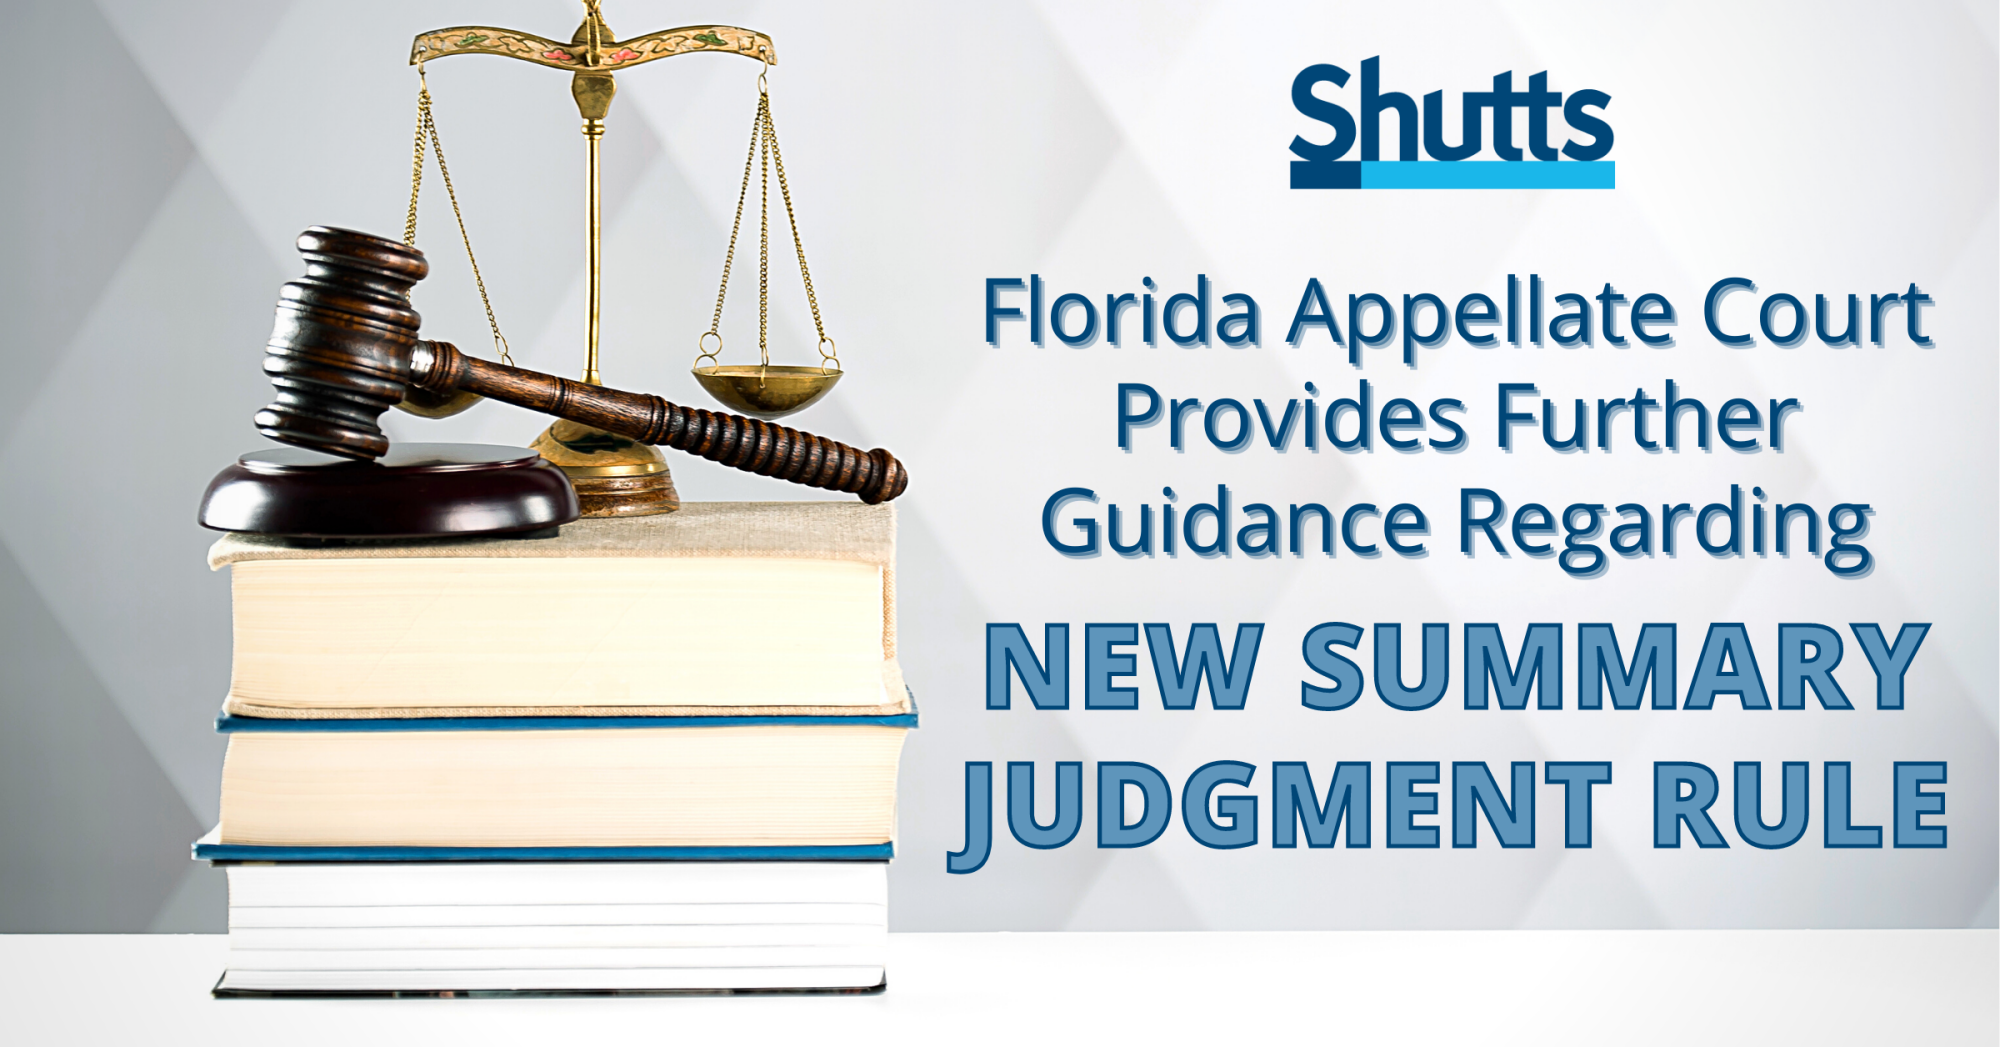 Florida Appellate Court Provides Further Guidance Regarding New Summary Judgment Rule